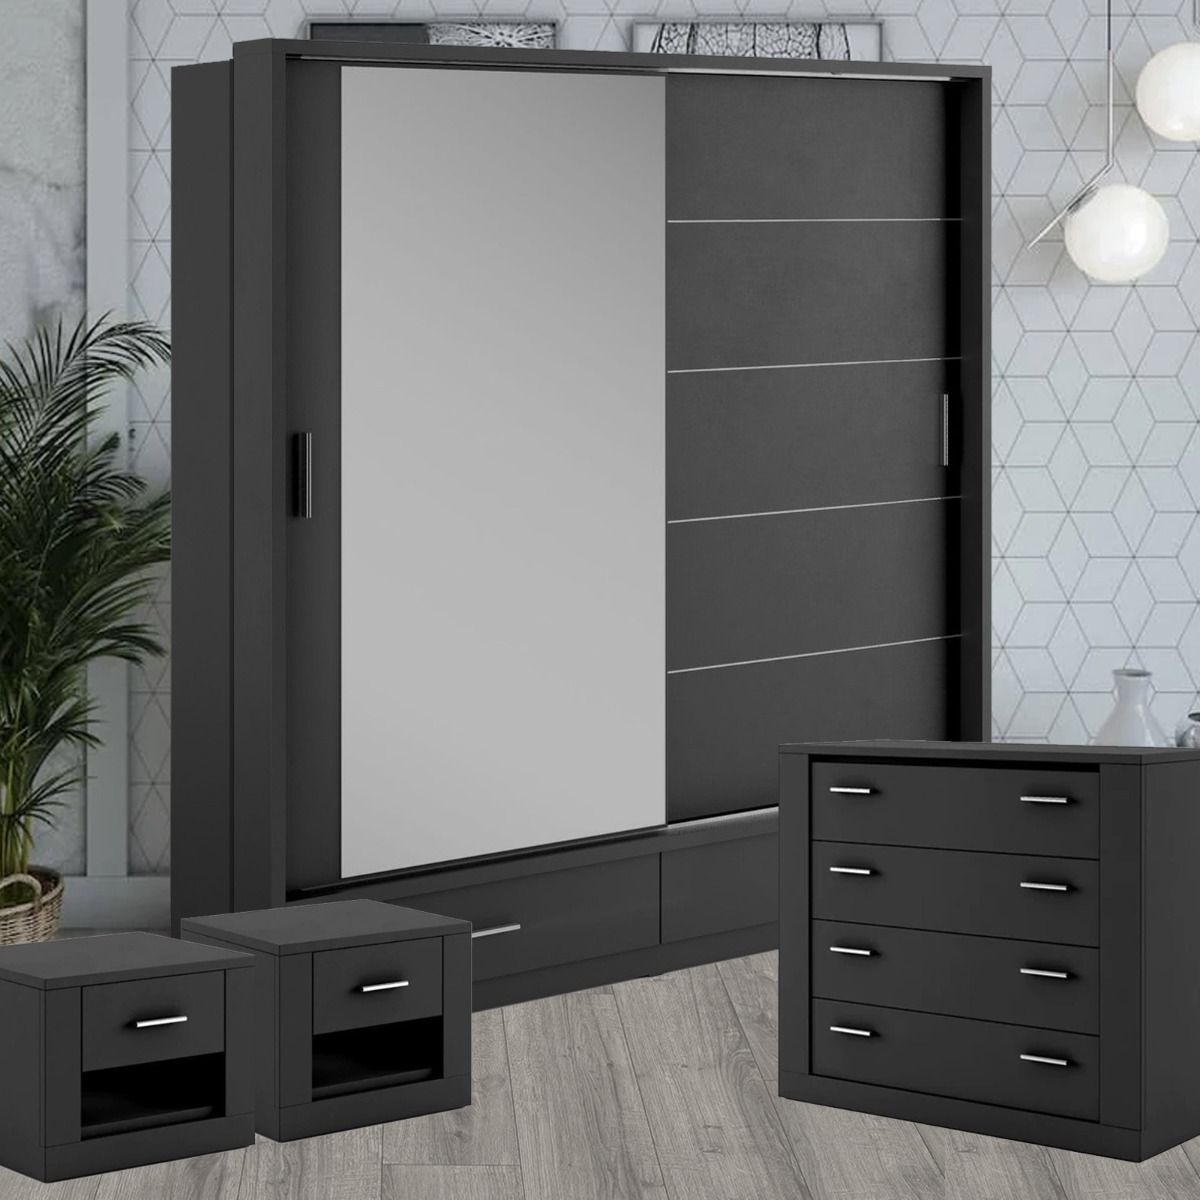 Bedroom Furniture Sets On Sale | Wardrobe Direct™ In Black And White Wardrobes Set (View 5 of 20)